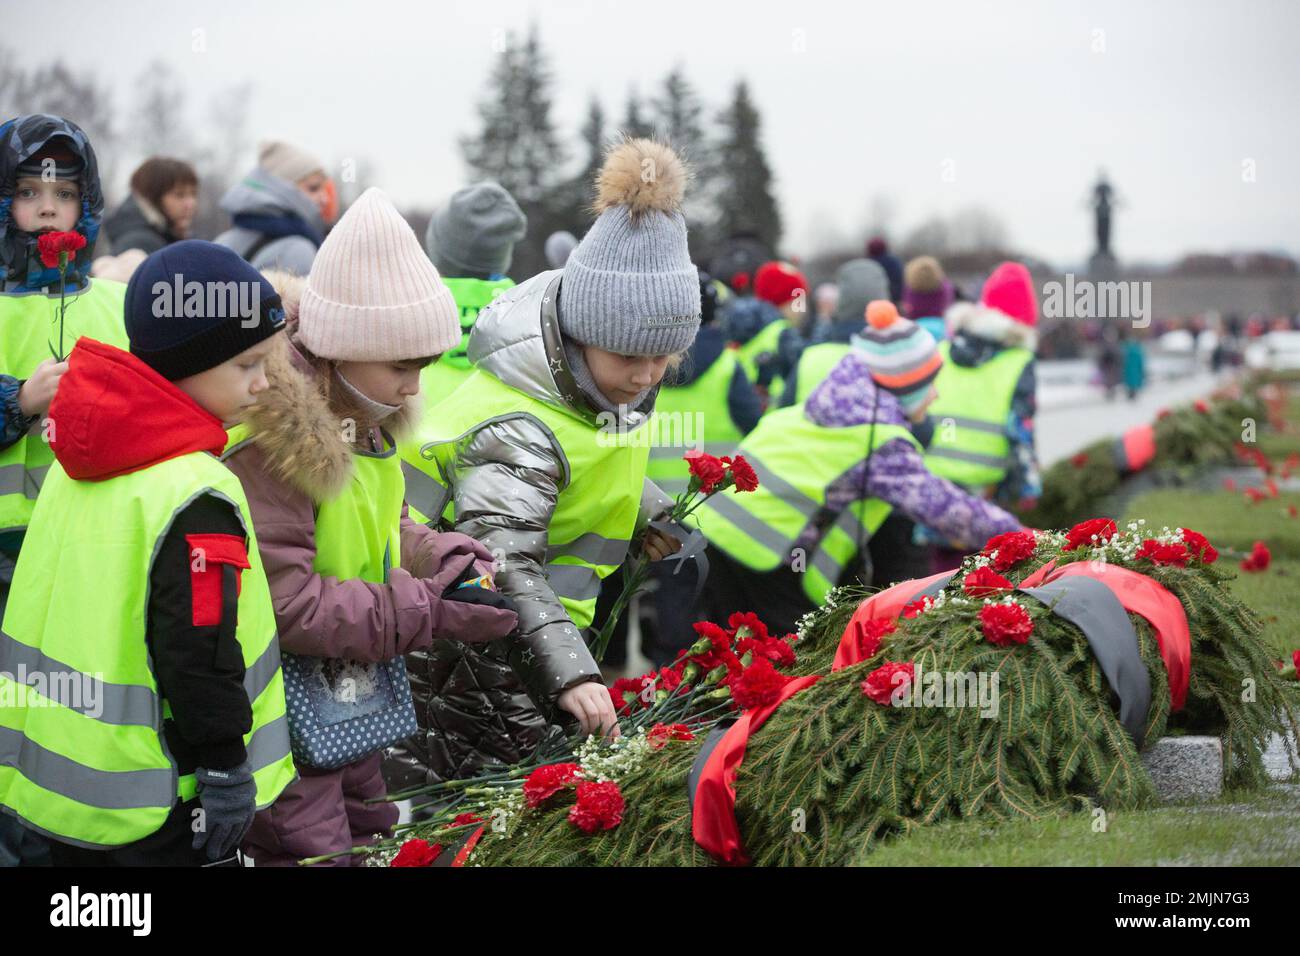 St. Petersburg, Nazi troops on Sept. 8. 27th Jan, 1944. Children lay flowers at a memorial activity in St. Petersburg, Russia, Jan. 27, 2023. Activities were held here to mark the 79th anniversary of ending the Nazi siege of Leningrad during World War II. Leningrad, known as St. Petersburg today, was besieged by the Nazi troops on Sept. 8, 1941 and the siege was lifted on Jan. 27, 1944. Credit: Irina Motina/Xinhua/Alamy Live News Stock Photo